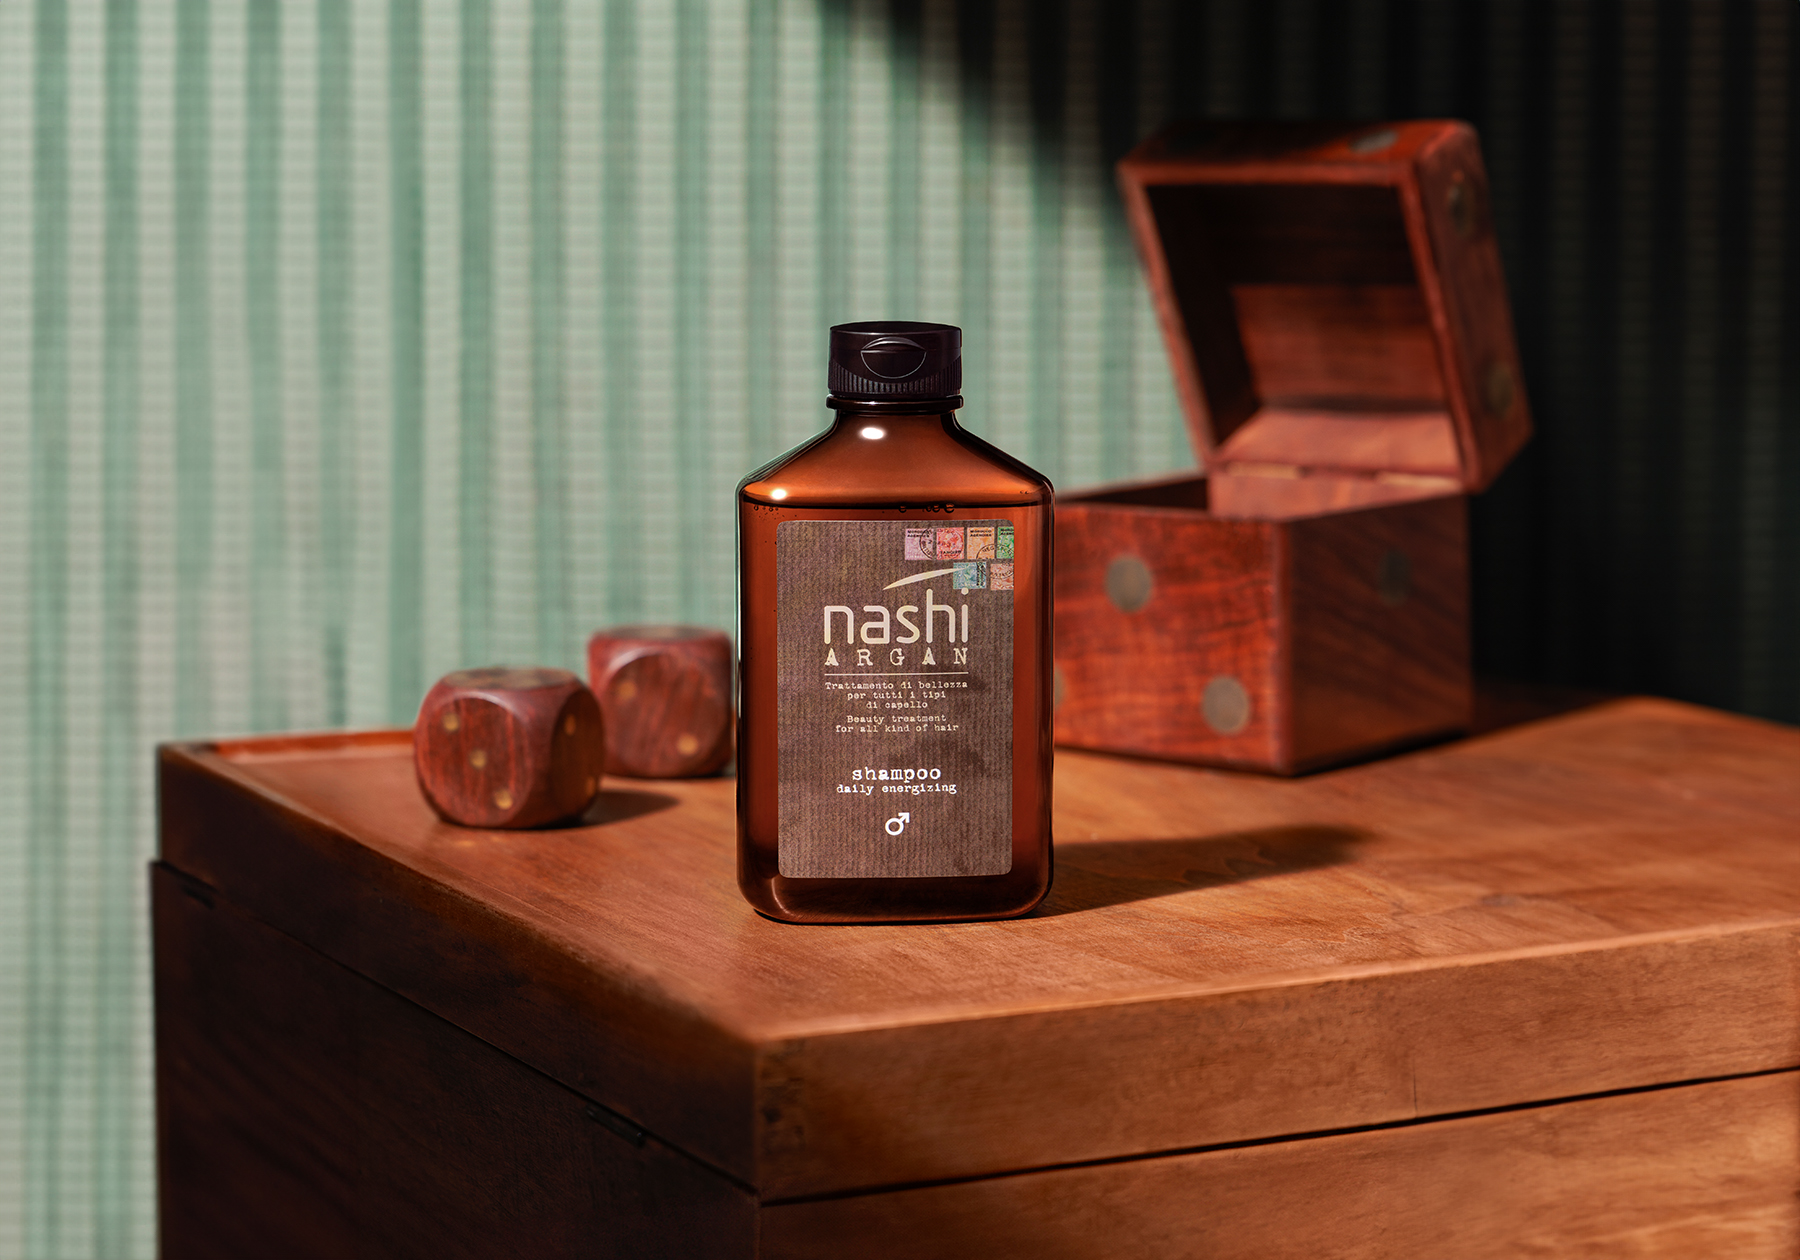 Nashi Argan - Men, women, children For healthy hair our #NashiGirls  recommend this moisturizing duo: Shampoo and Conditioner are perfect for  all types of hair 😉 Do you already use this special